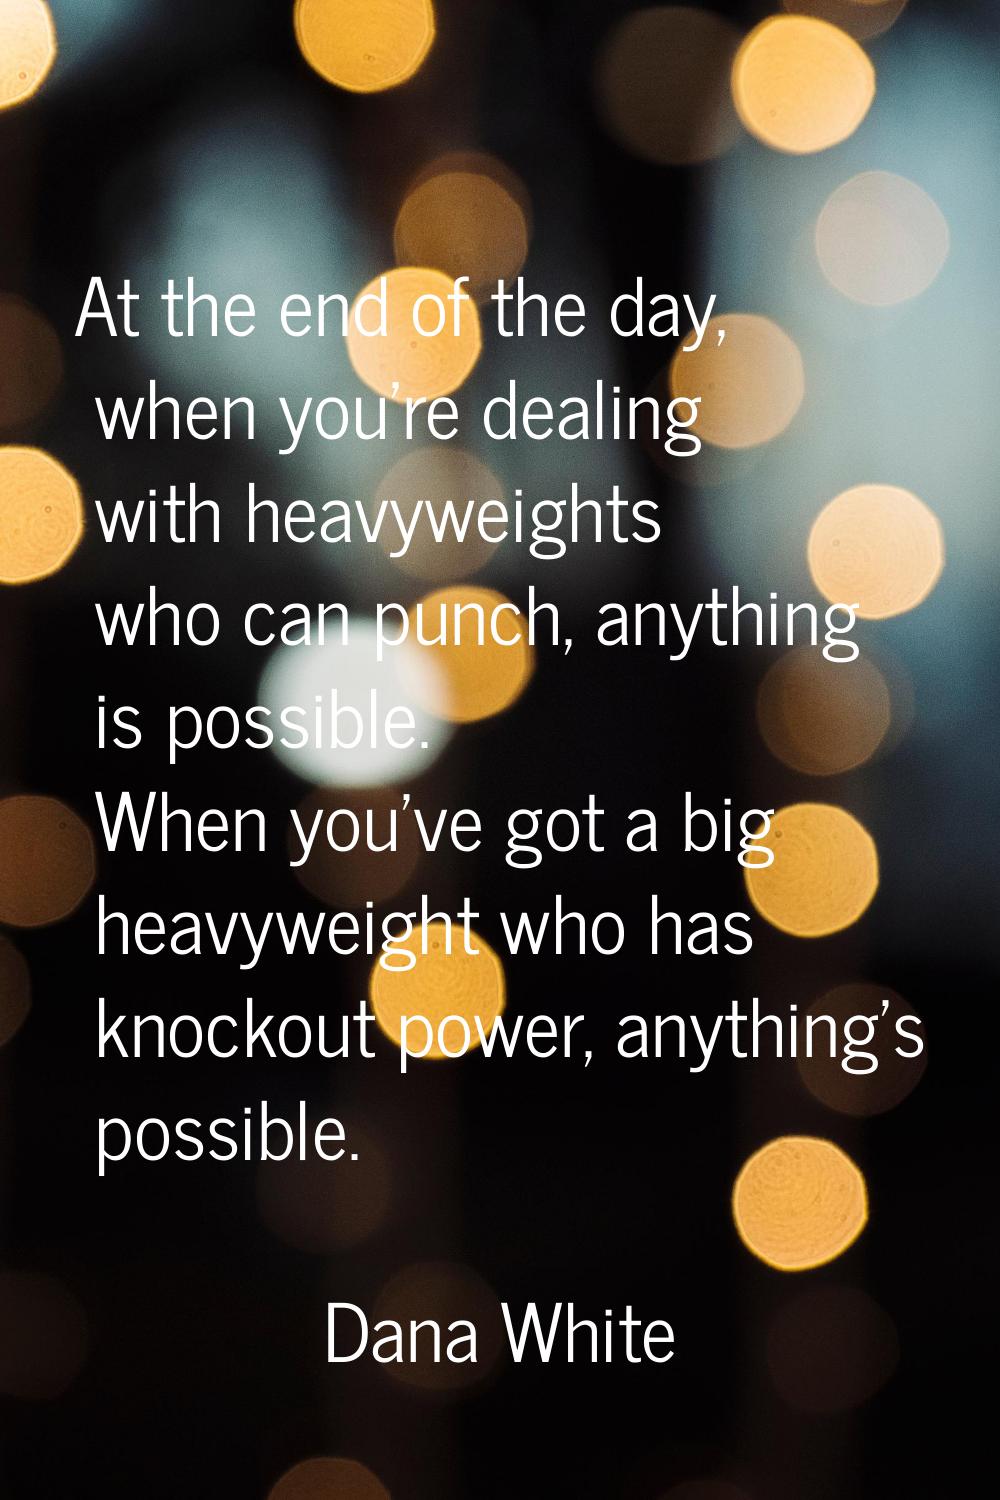 At the end of the day, when you're dealing with heavyweights who can punch, anything is possible. W